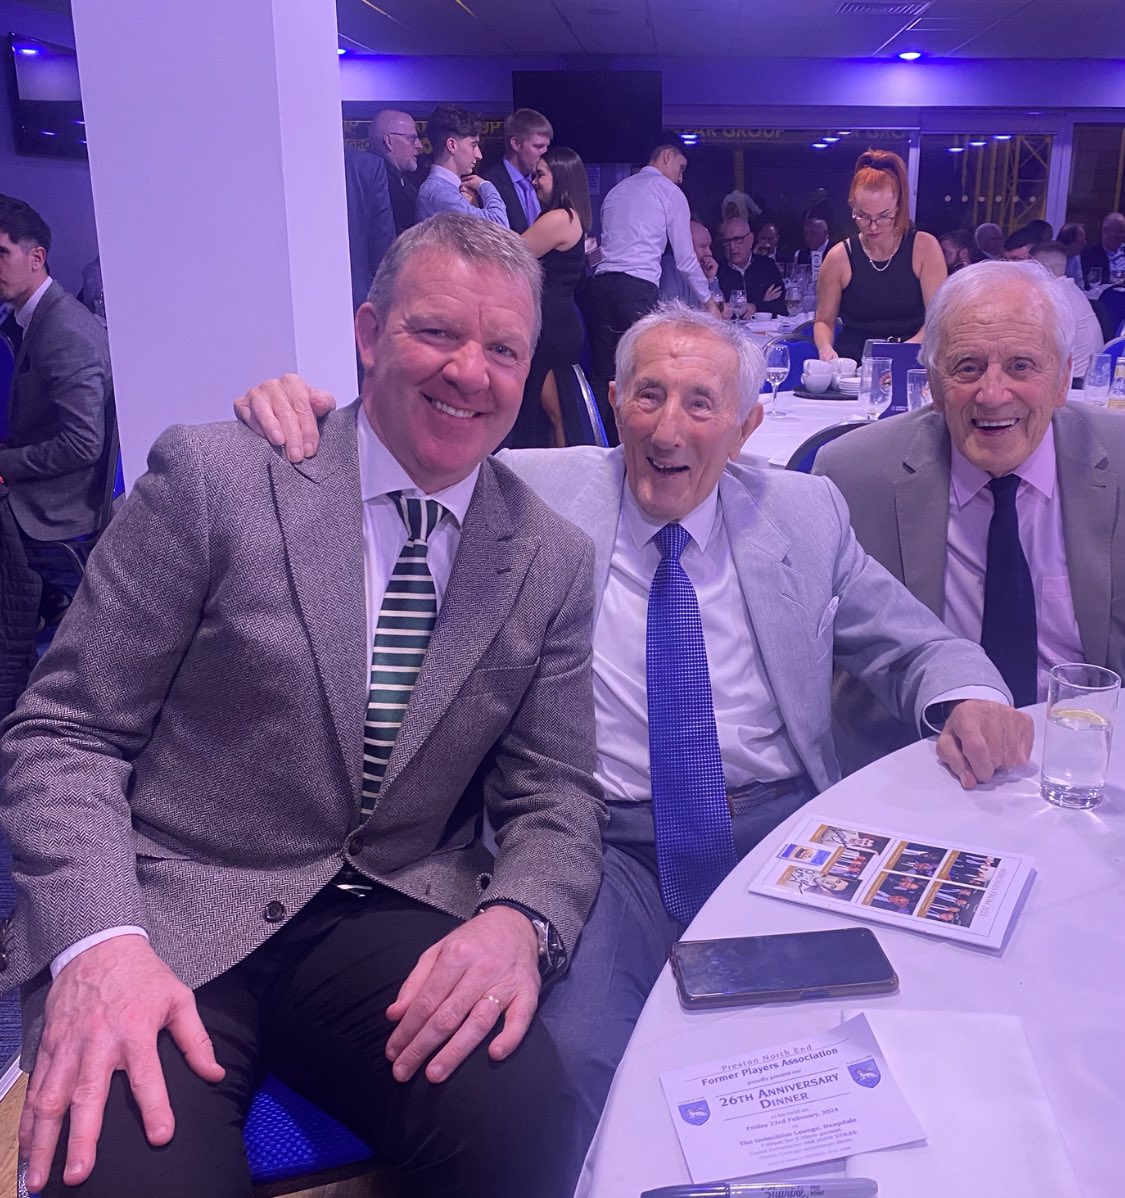 A joy to be in the company of @pnefc players, Eric Jones (92) & Peter Higham (96), at last nights PNE ex-players dinner. The stories they tell of their time playing alongside Sir Tom Finney are priceless. Thanks Eric & Peter 👏